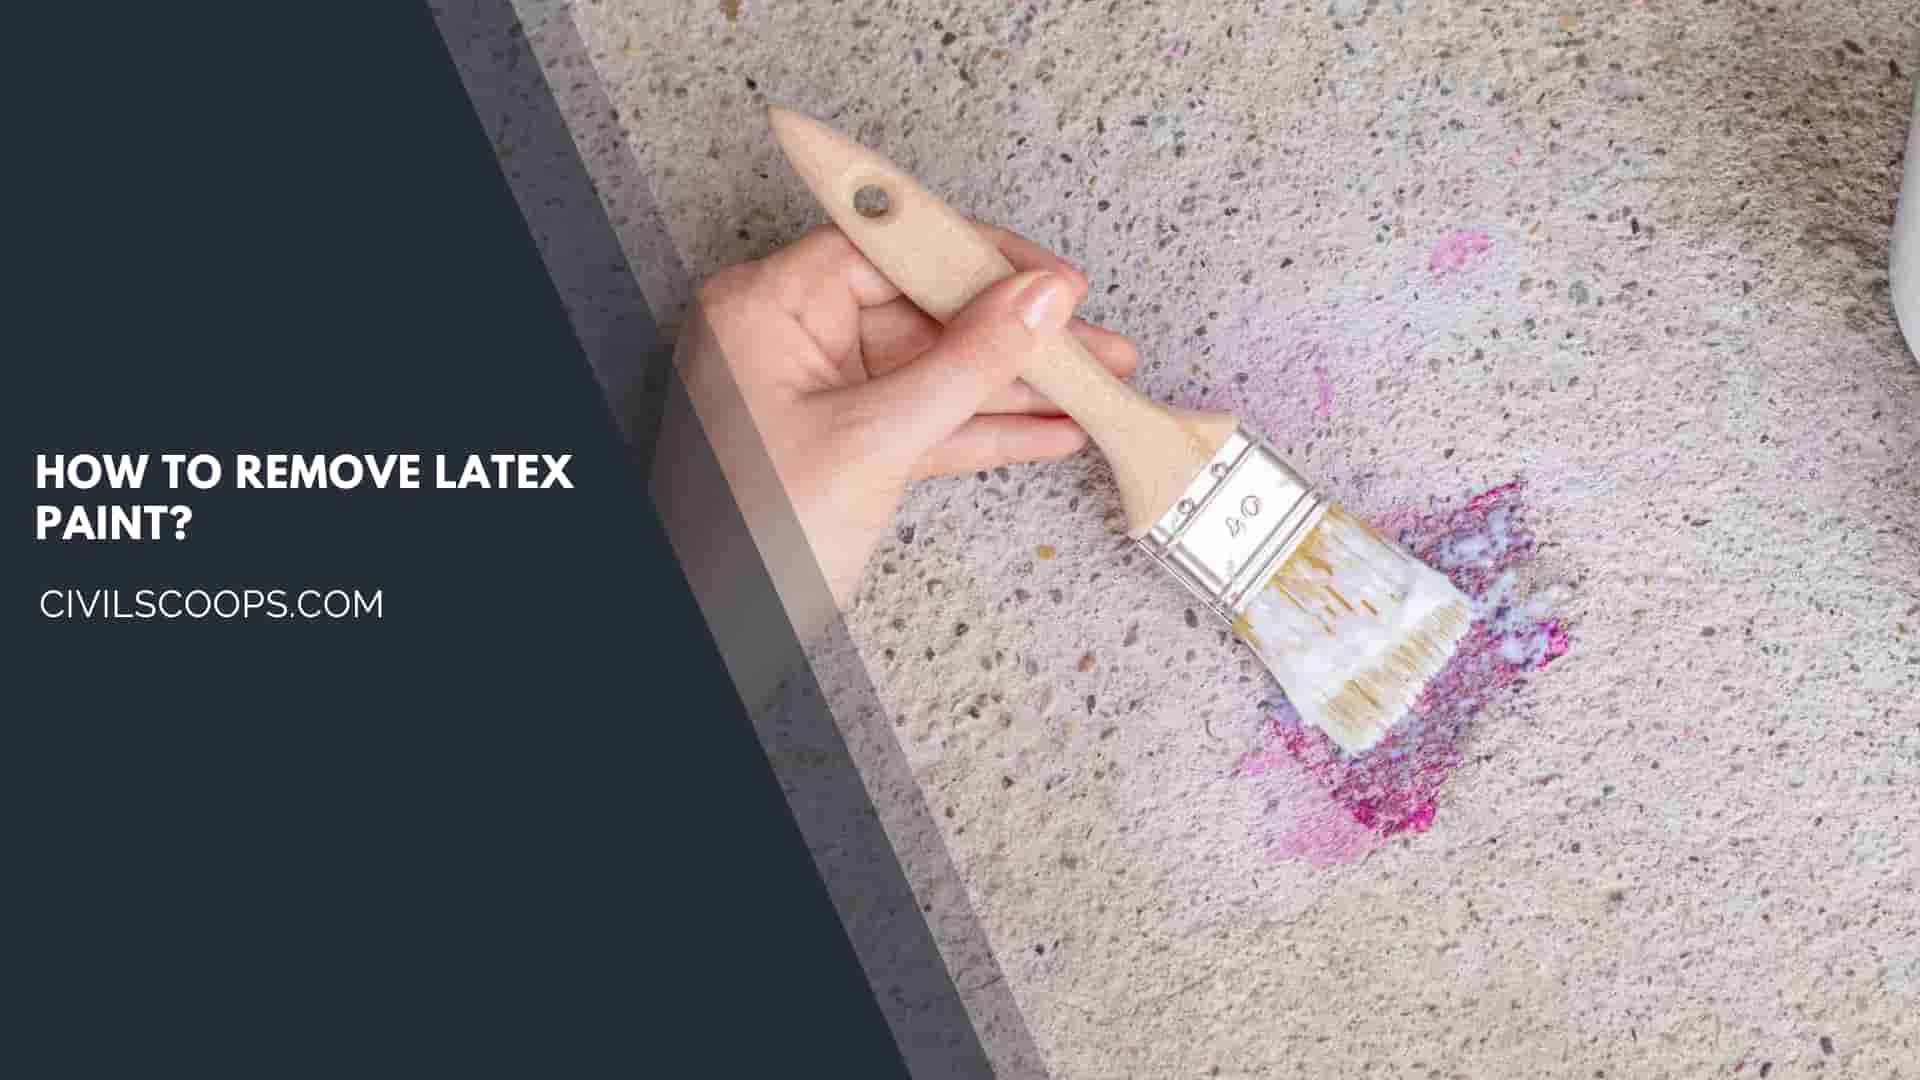 How to Remove Latex Paint?